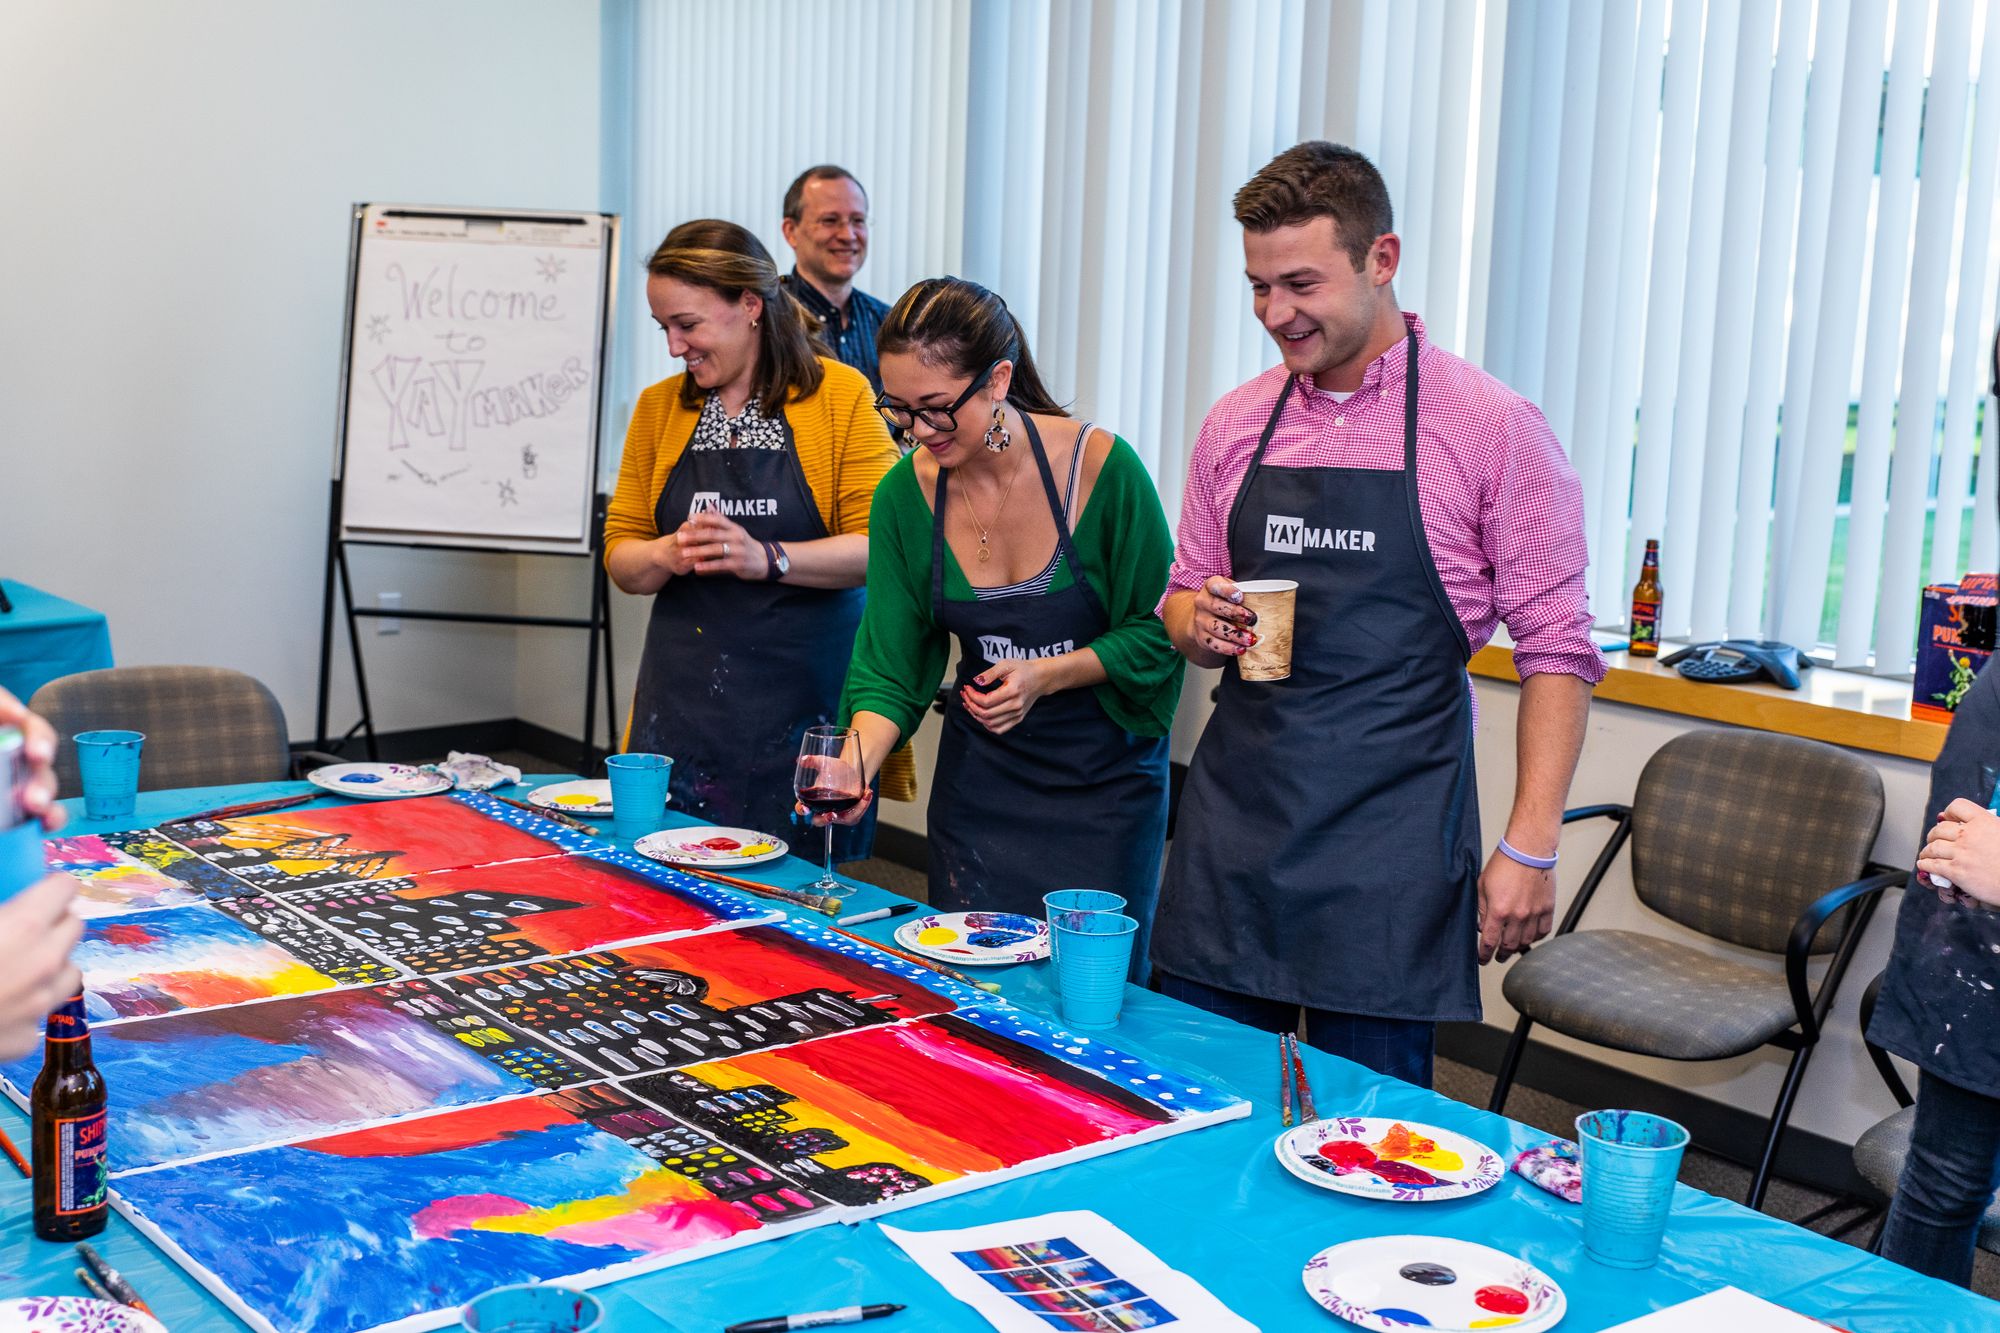 Paint and sip team building event with Yaymaker